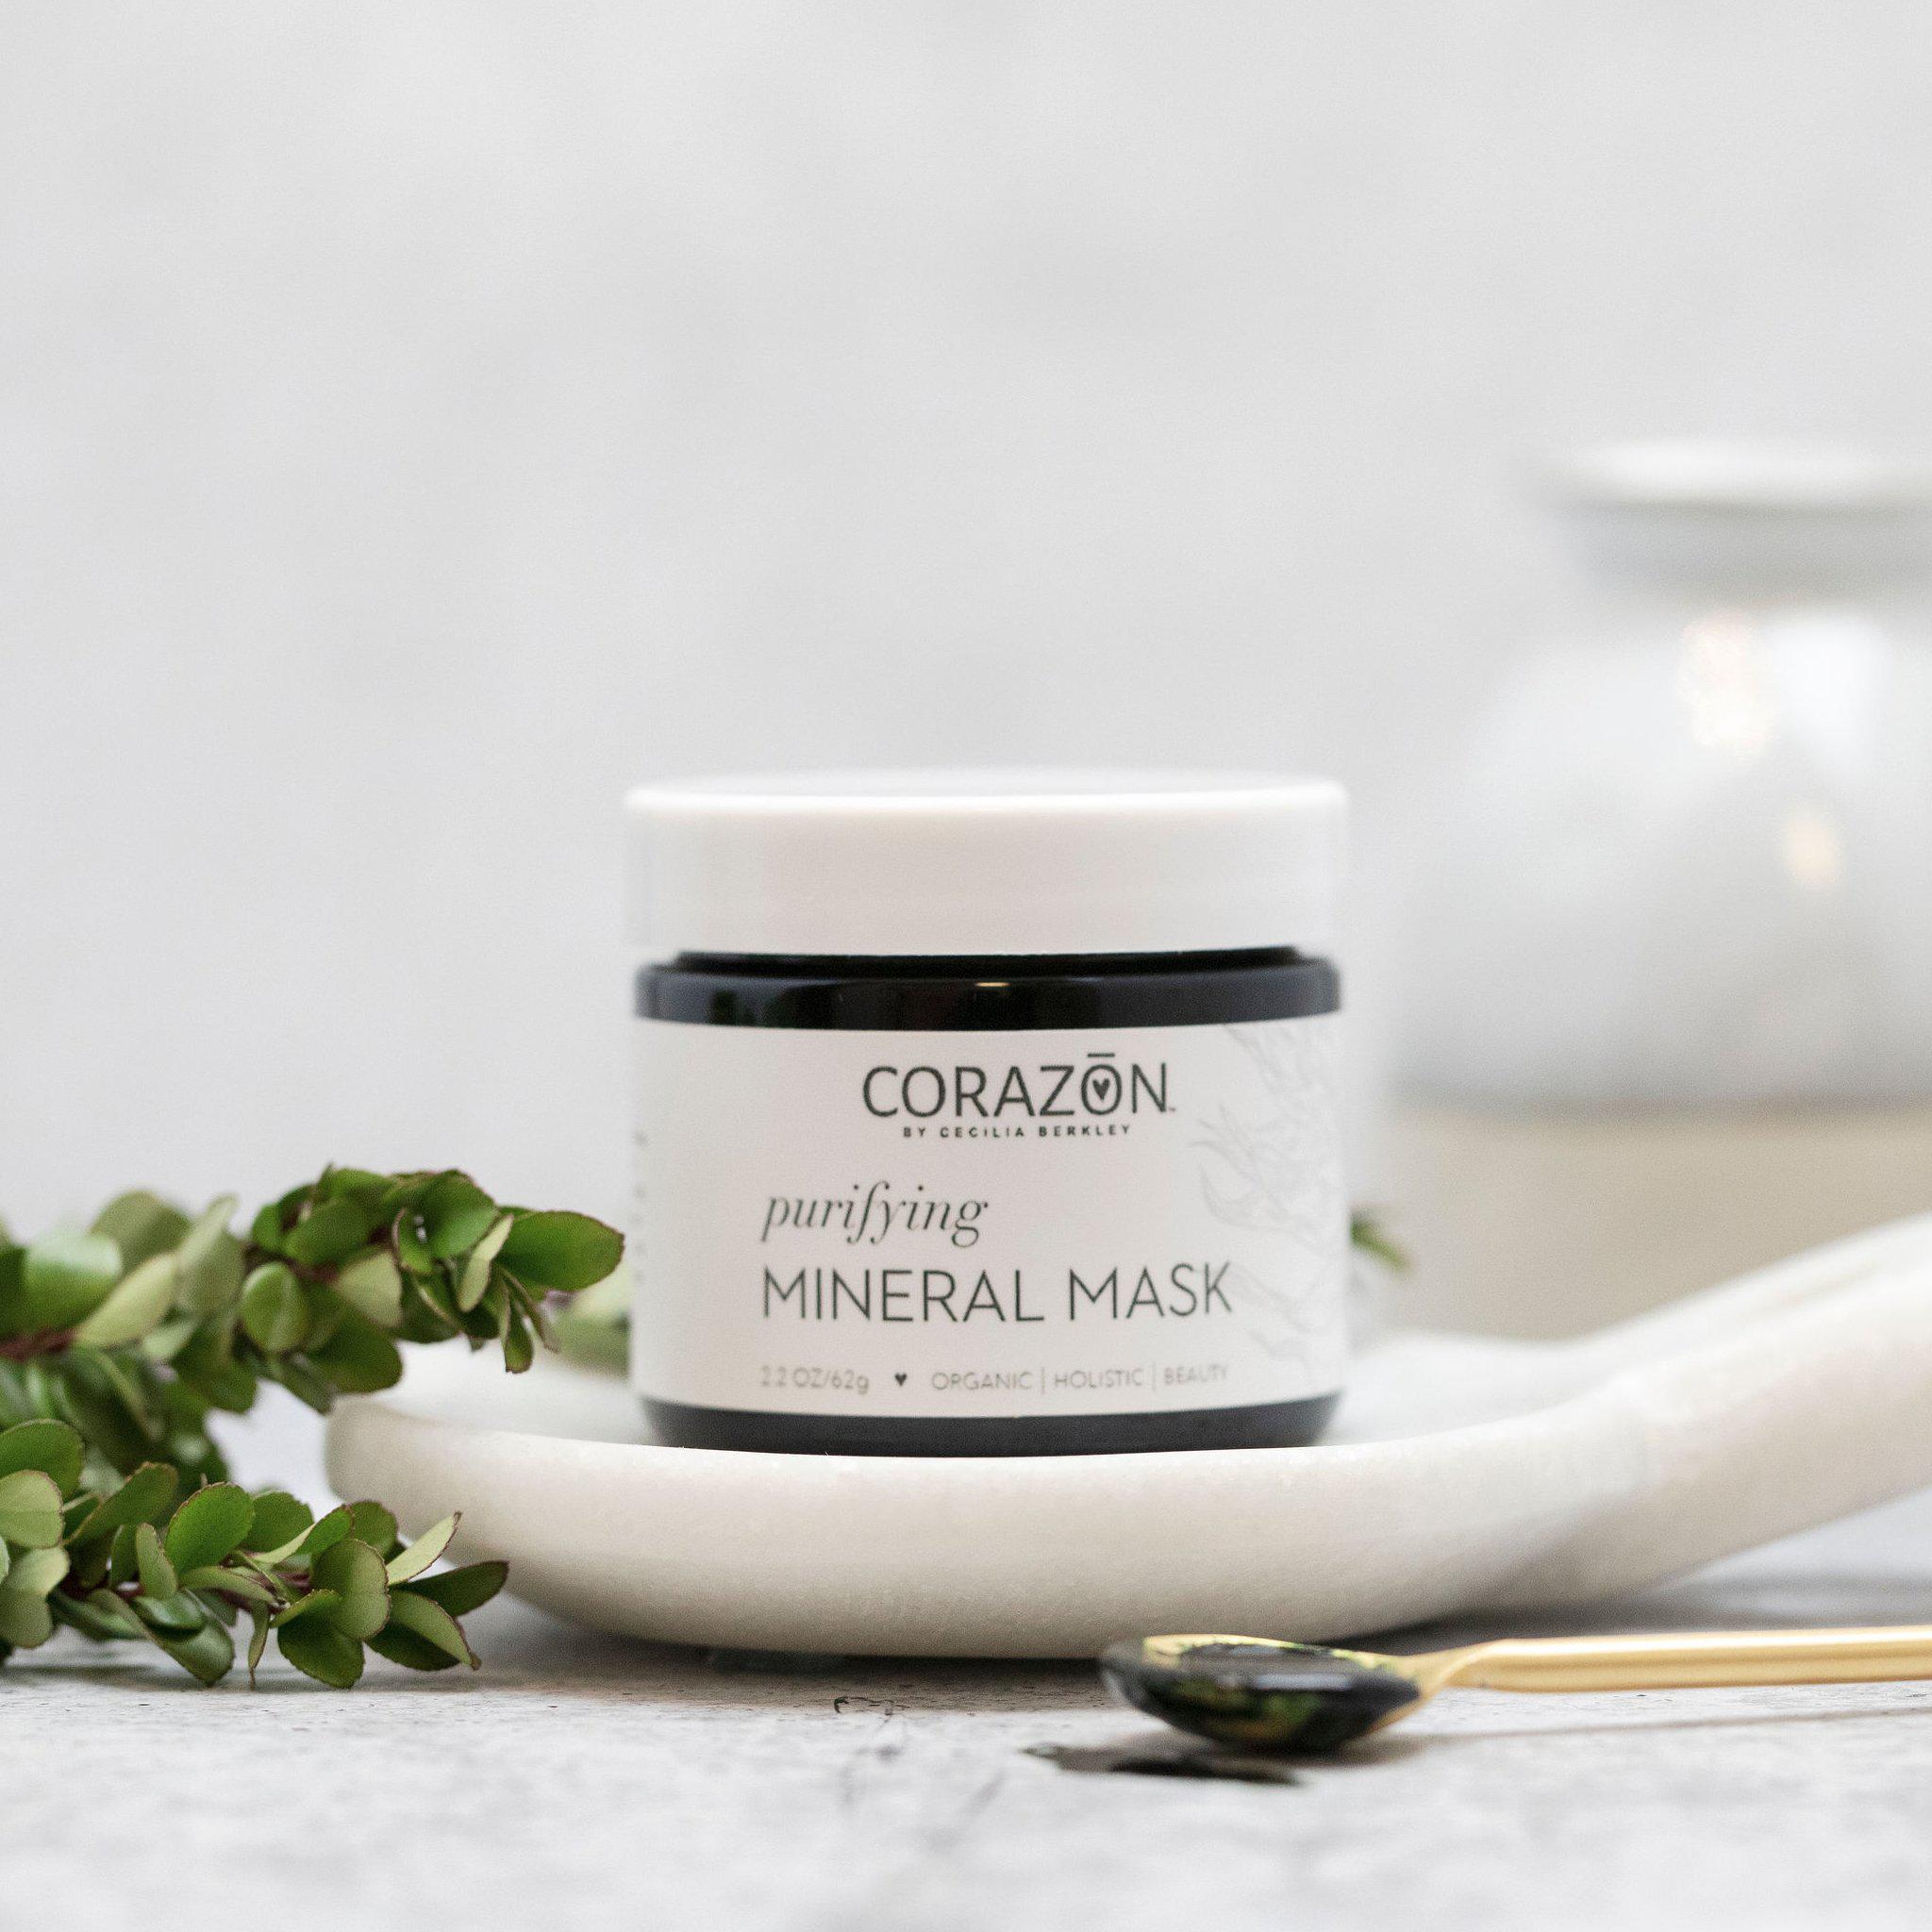 FACE MASK - PURIFYING MINERAL MASK